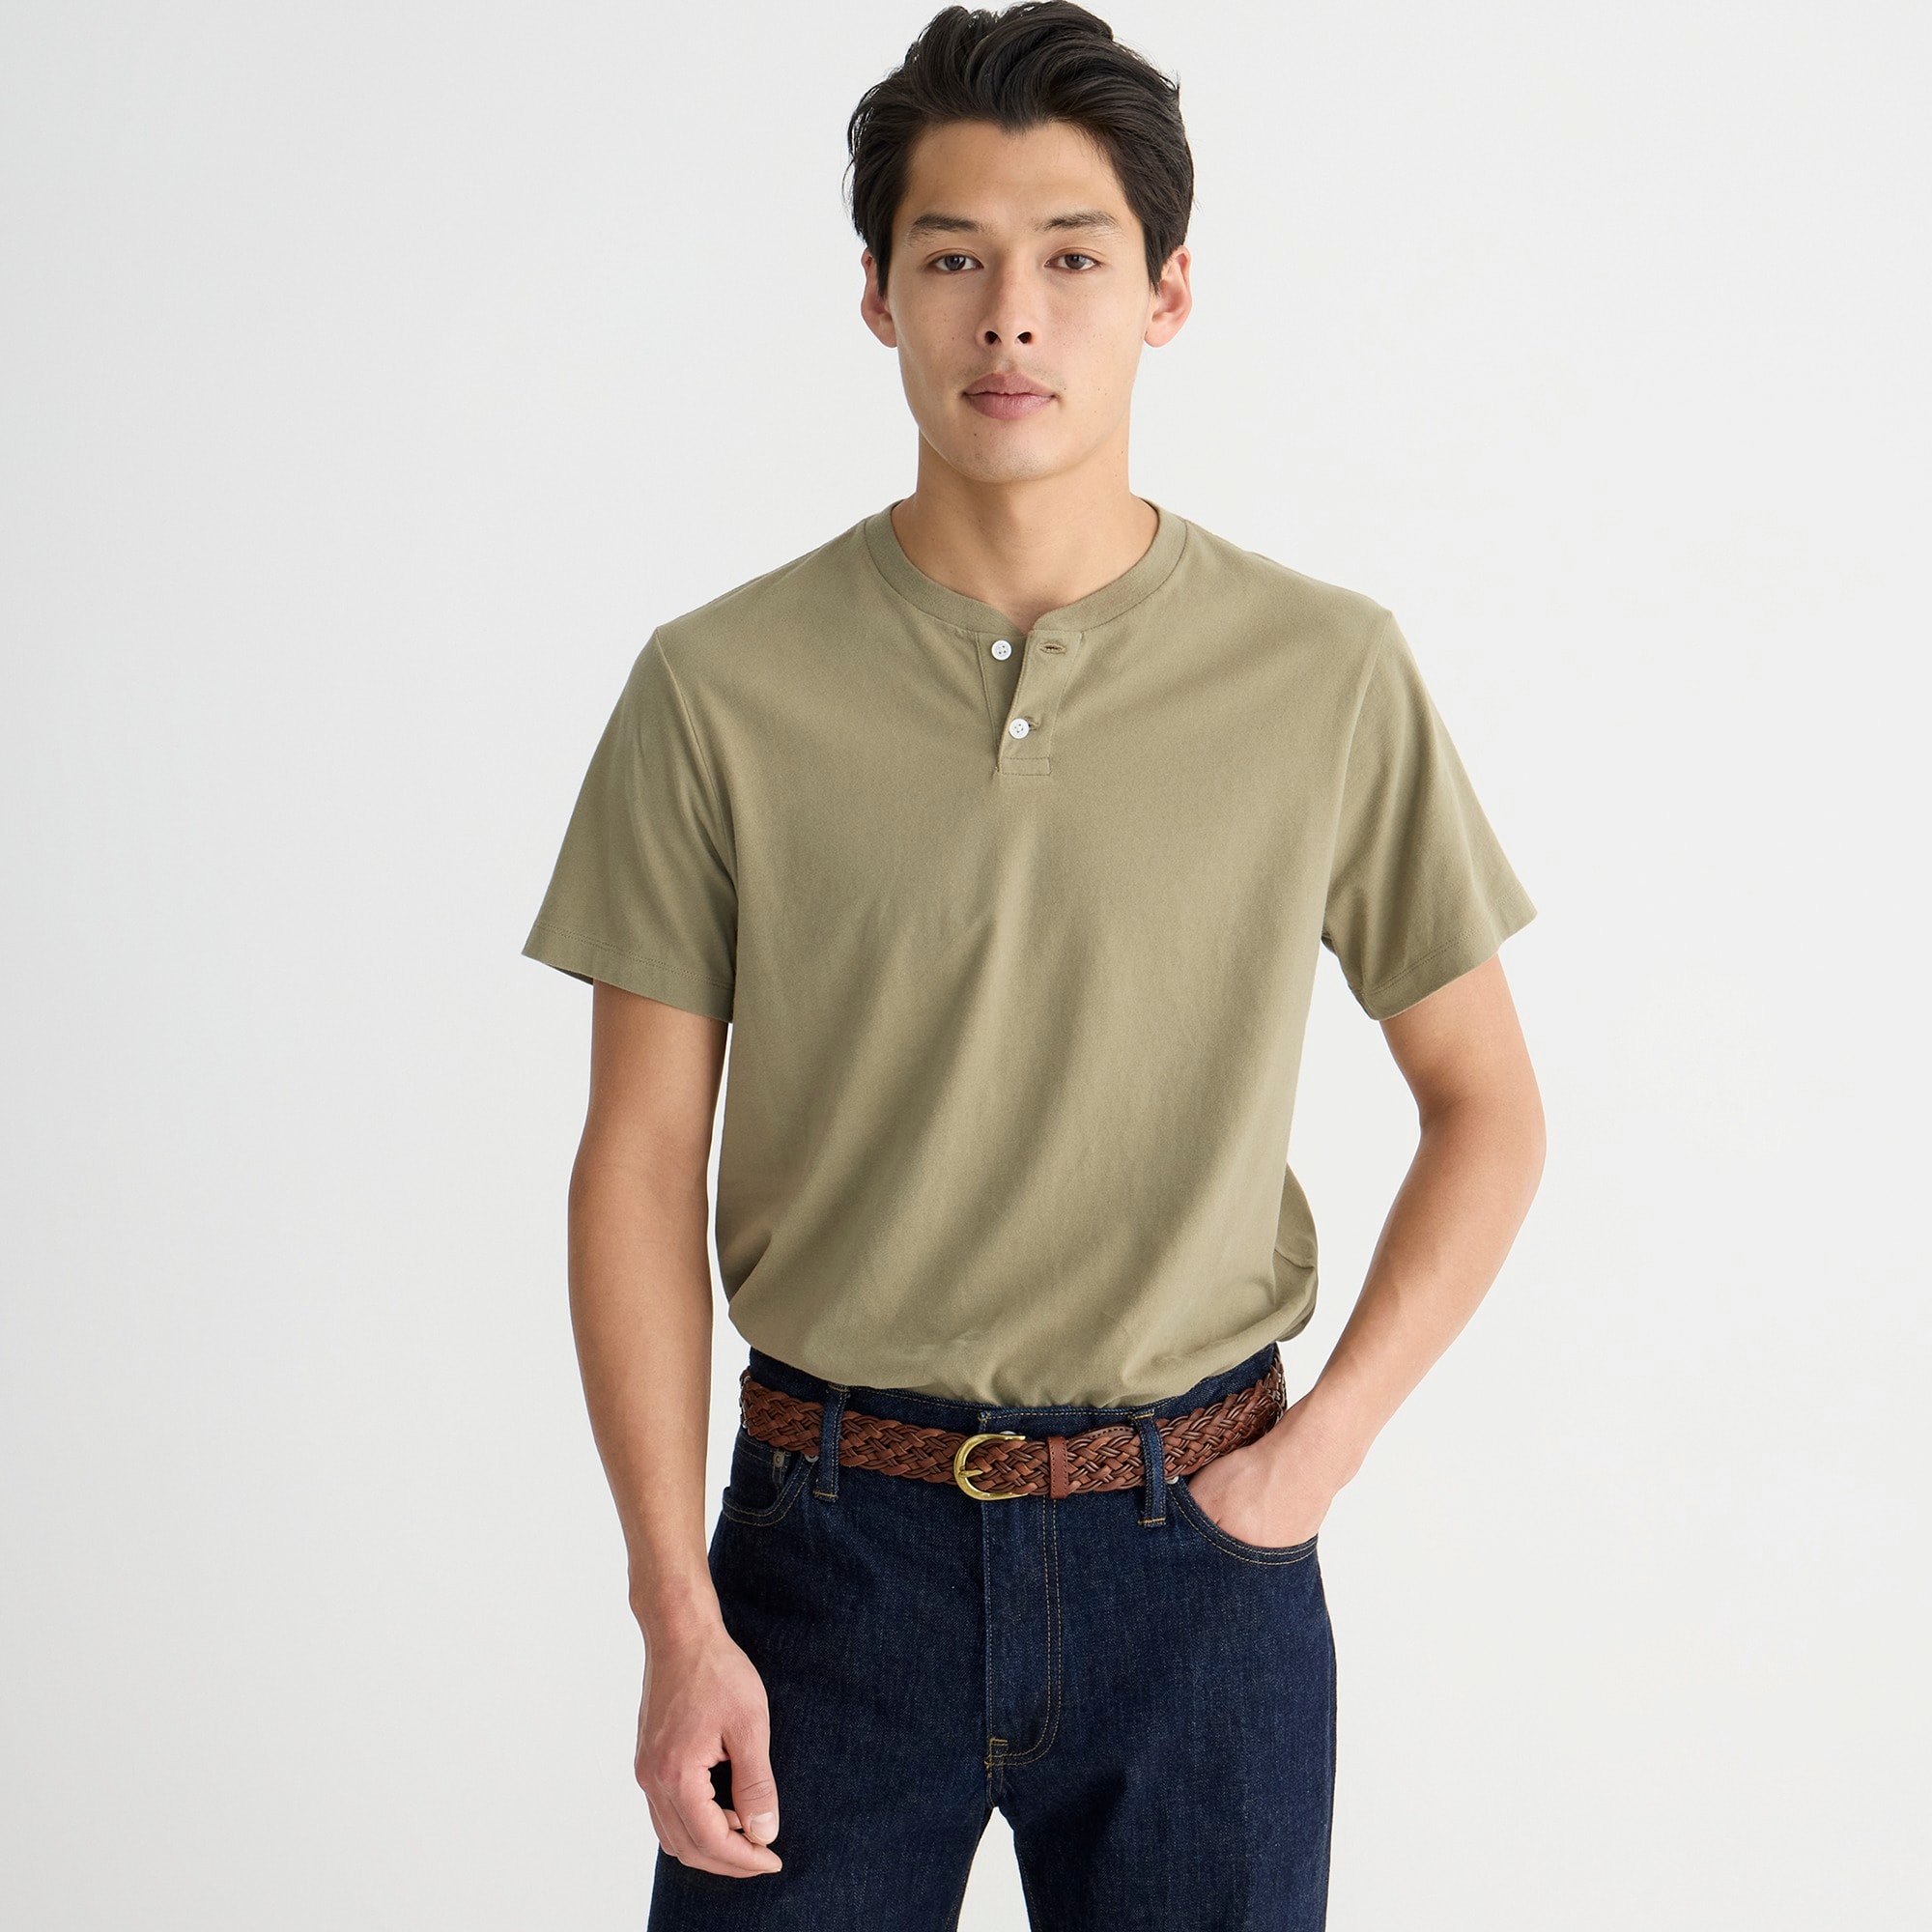 mens Tall short-sleeve sueded cotton henley